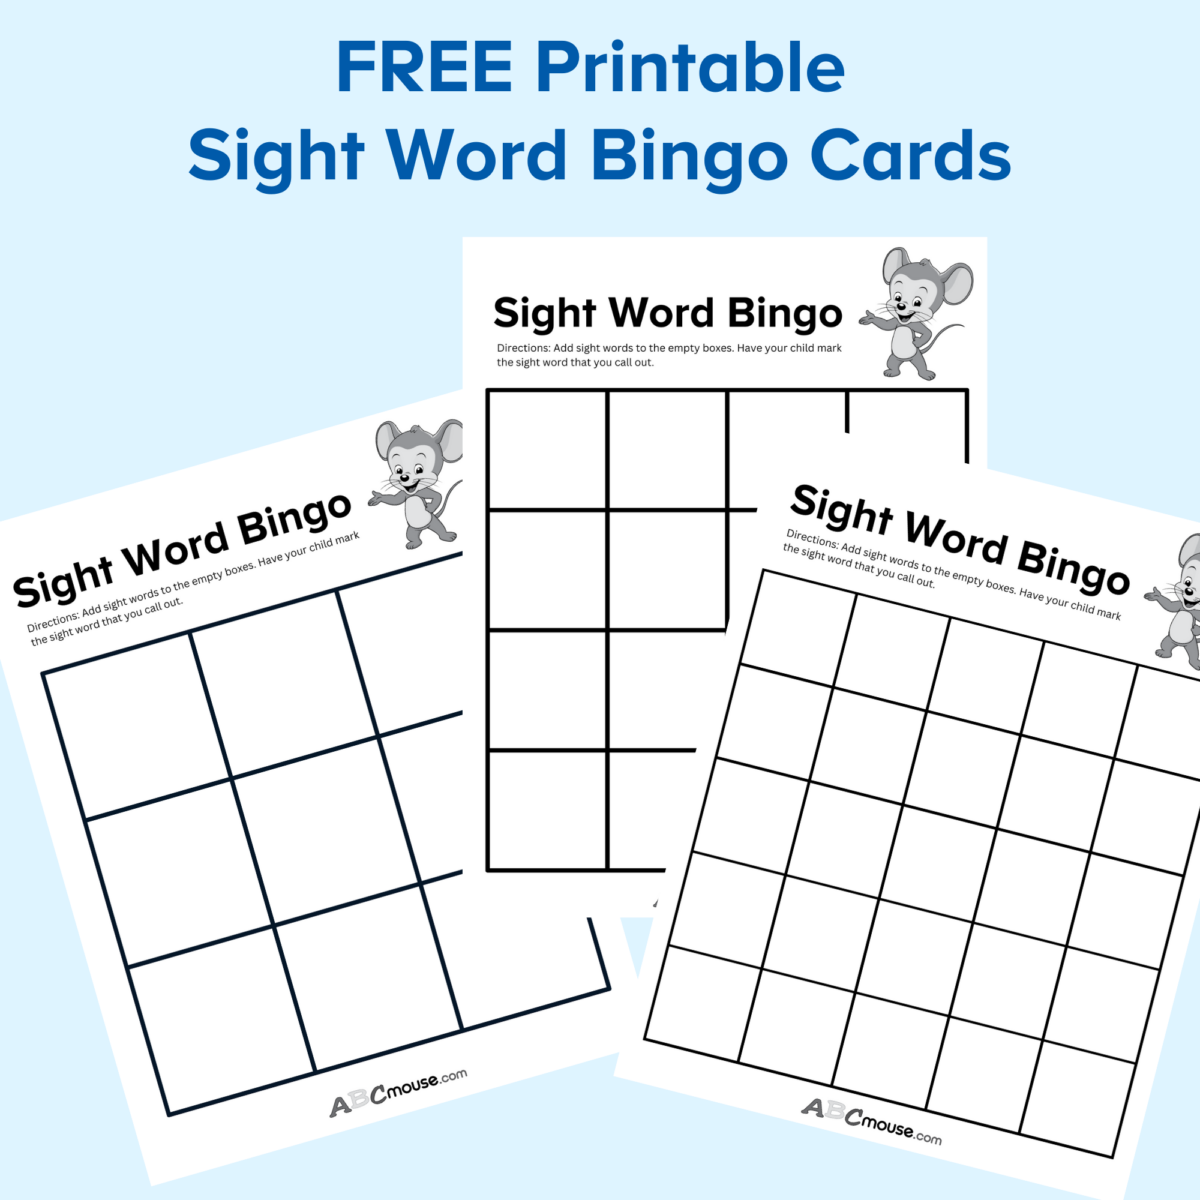 Free Printable sight word Bingo cards. Blank to fill in. 